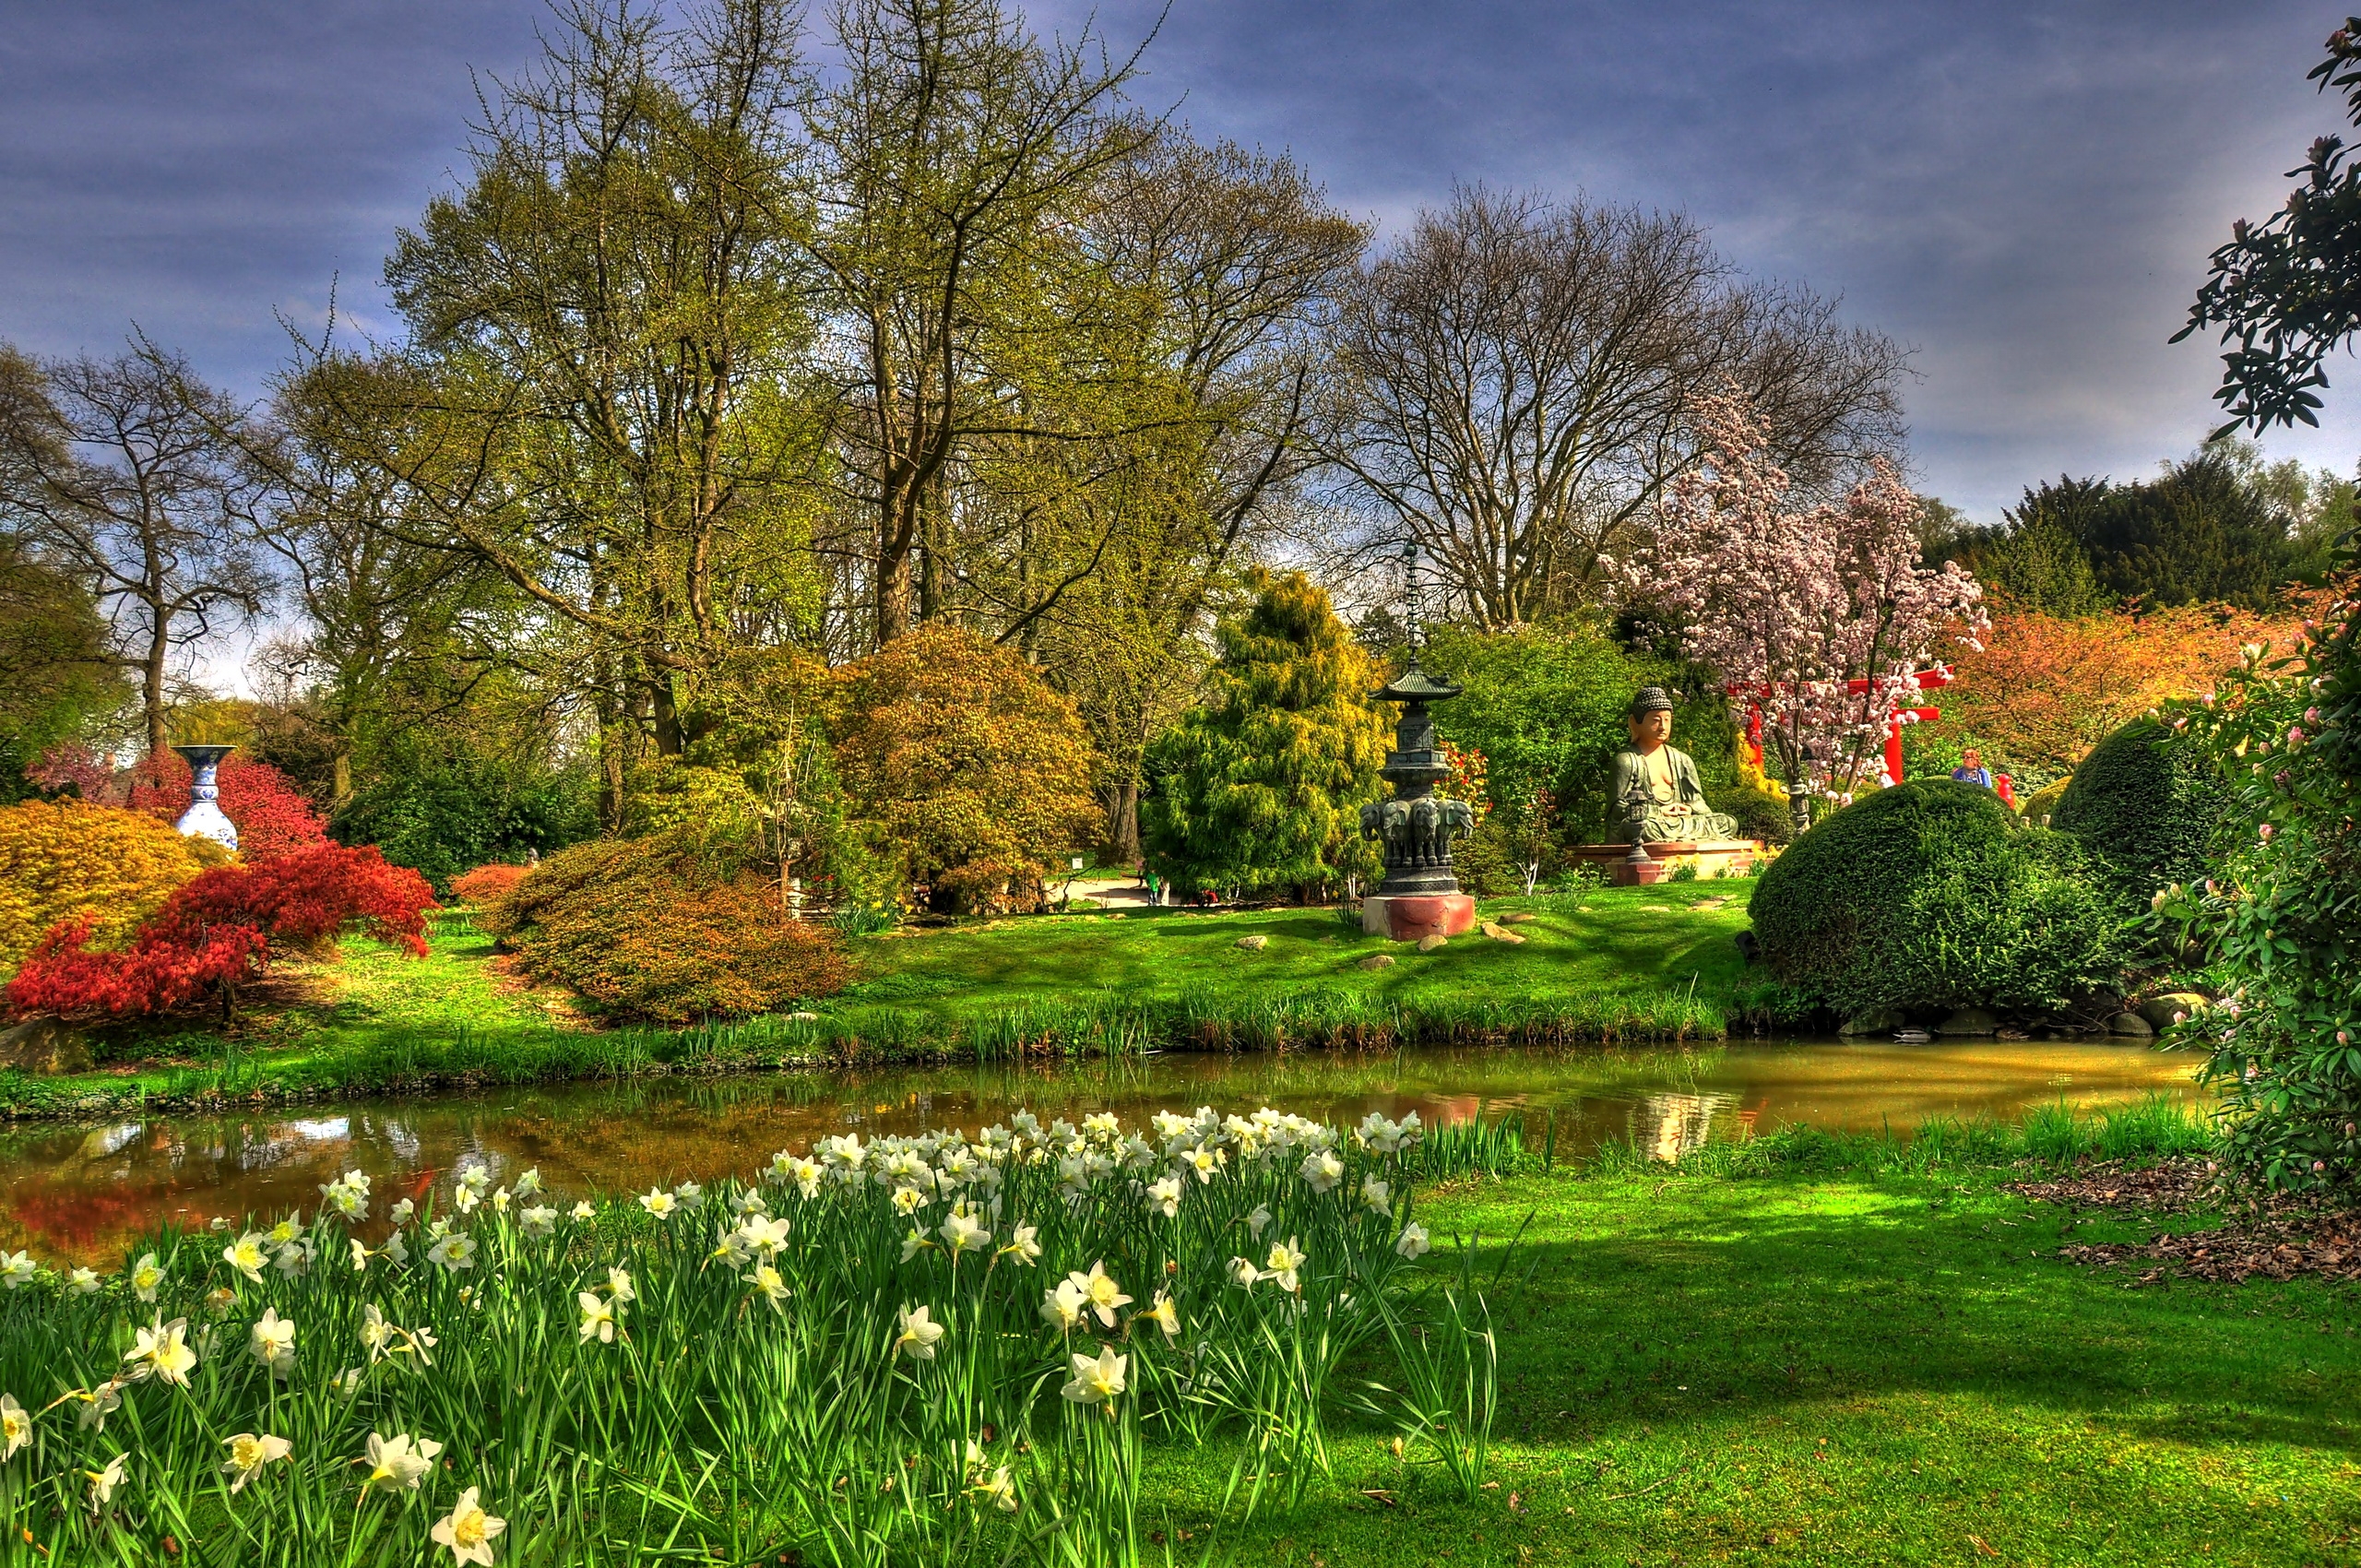 buddha, pond, nature, flowers, narcissussi, garden, statues